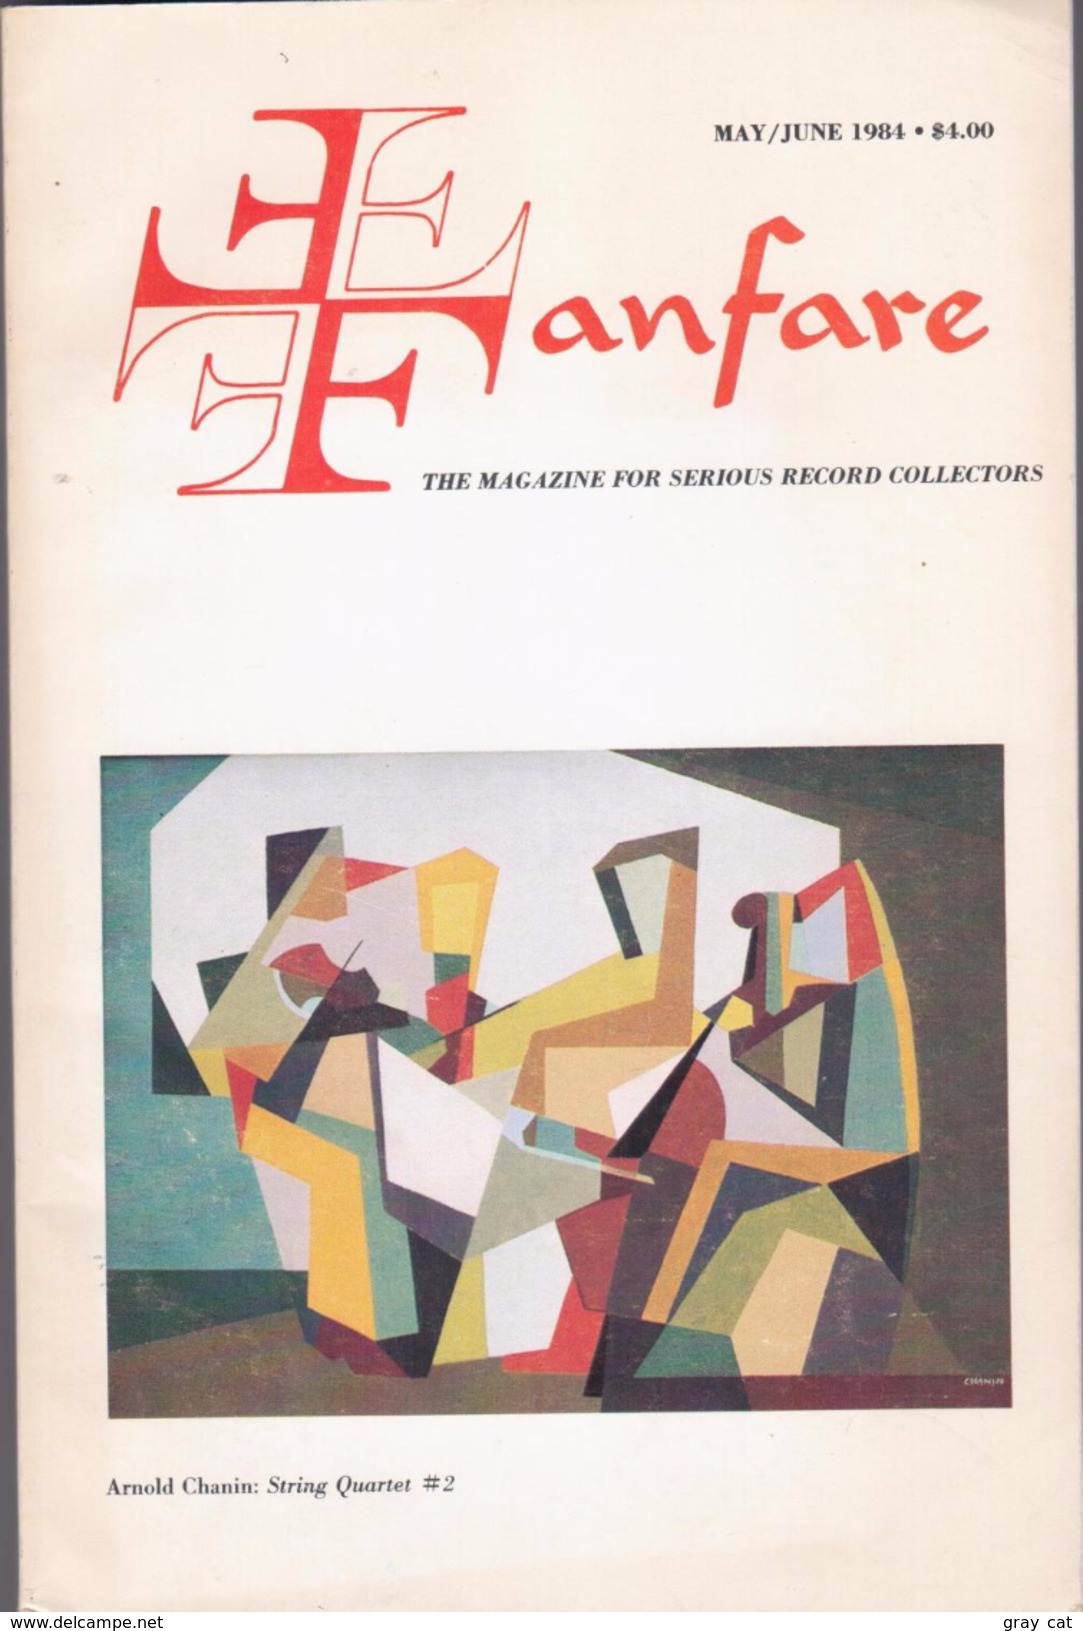 Fanfare, The Magazine For Serious Record Collectors, Vol. 7, No. 5, May/June 1984 - Entretenimiento